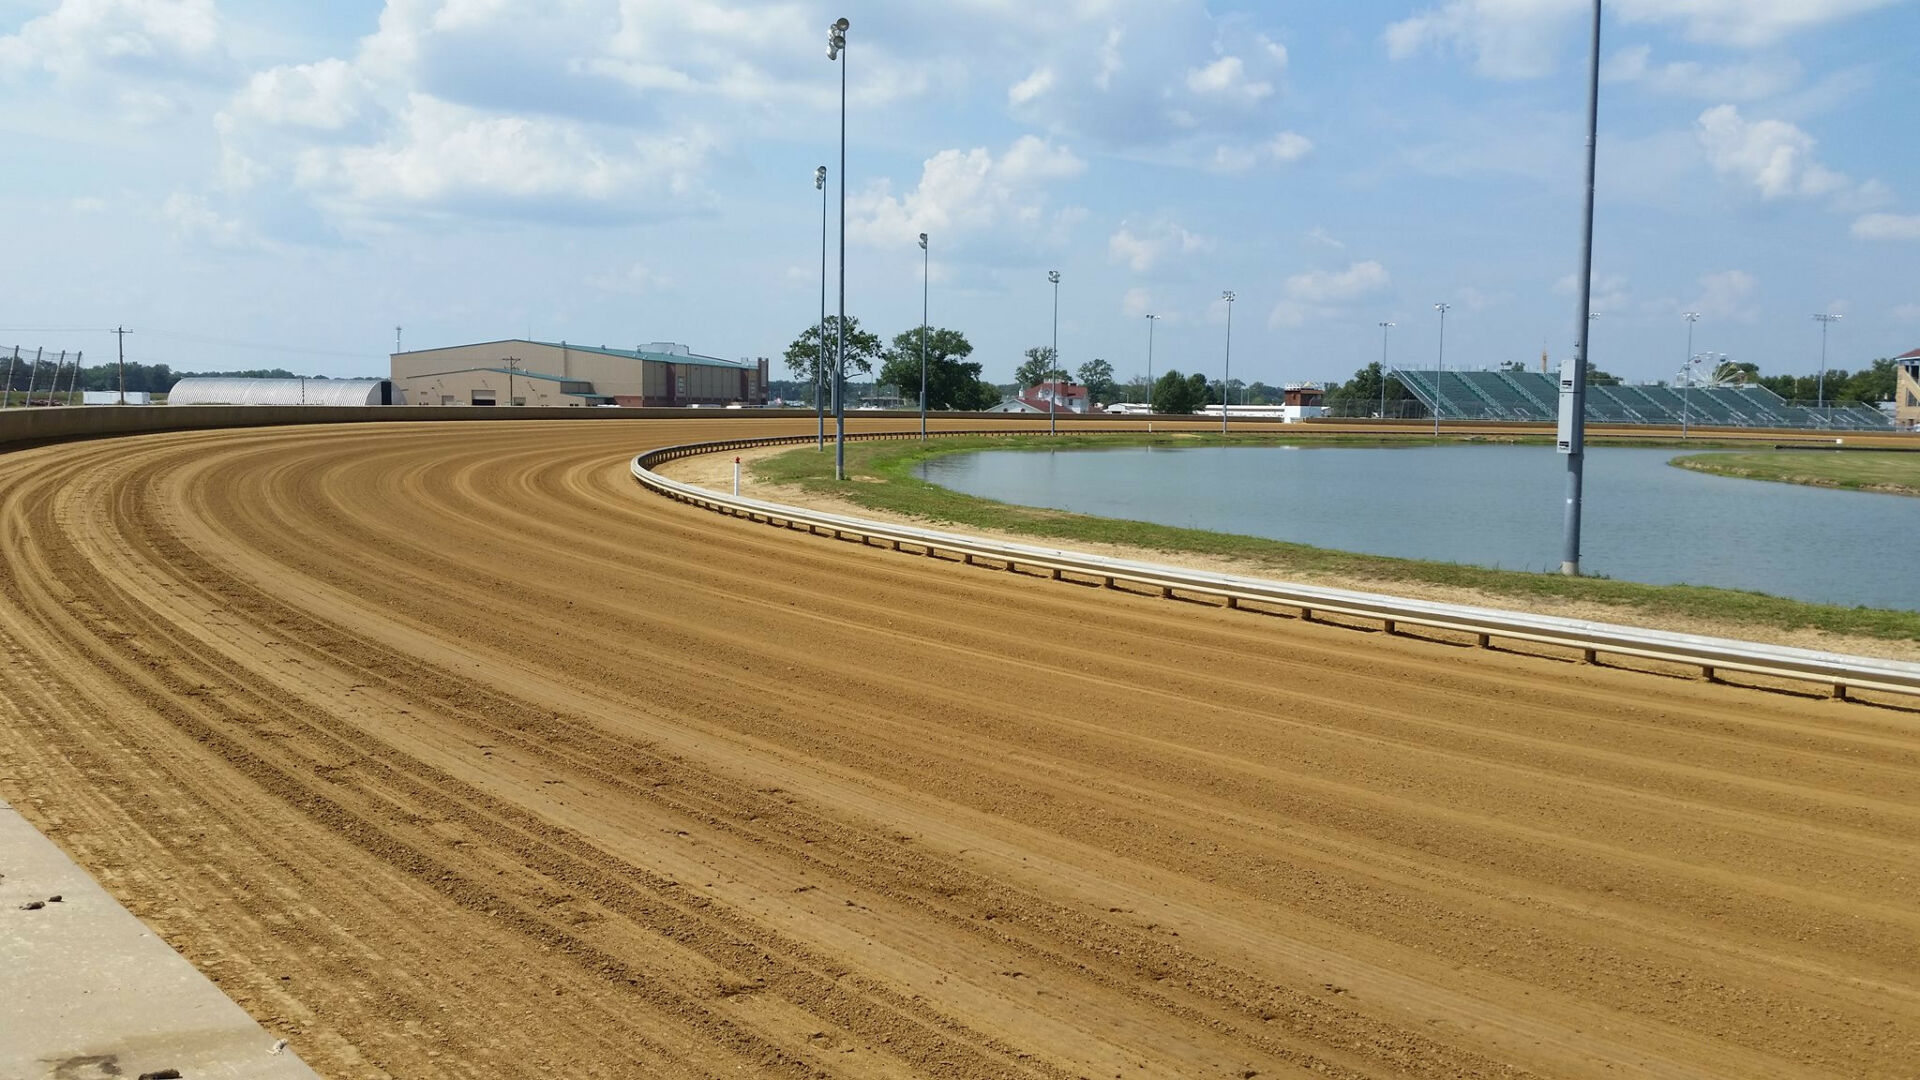 American Flat Track Race Results From The Du Quoin Mile... MotorsAddict